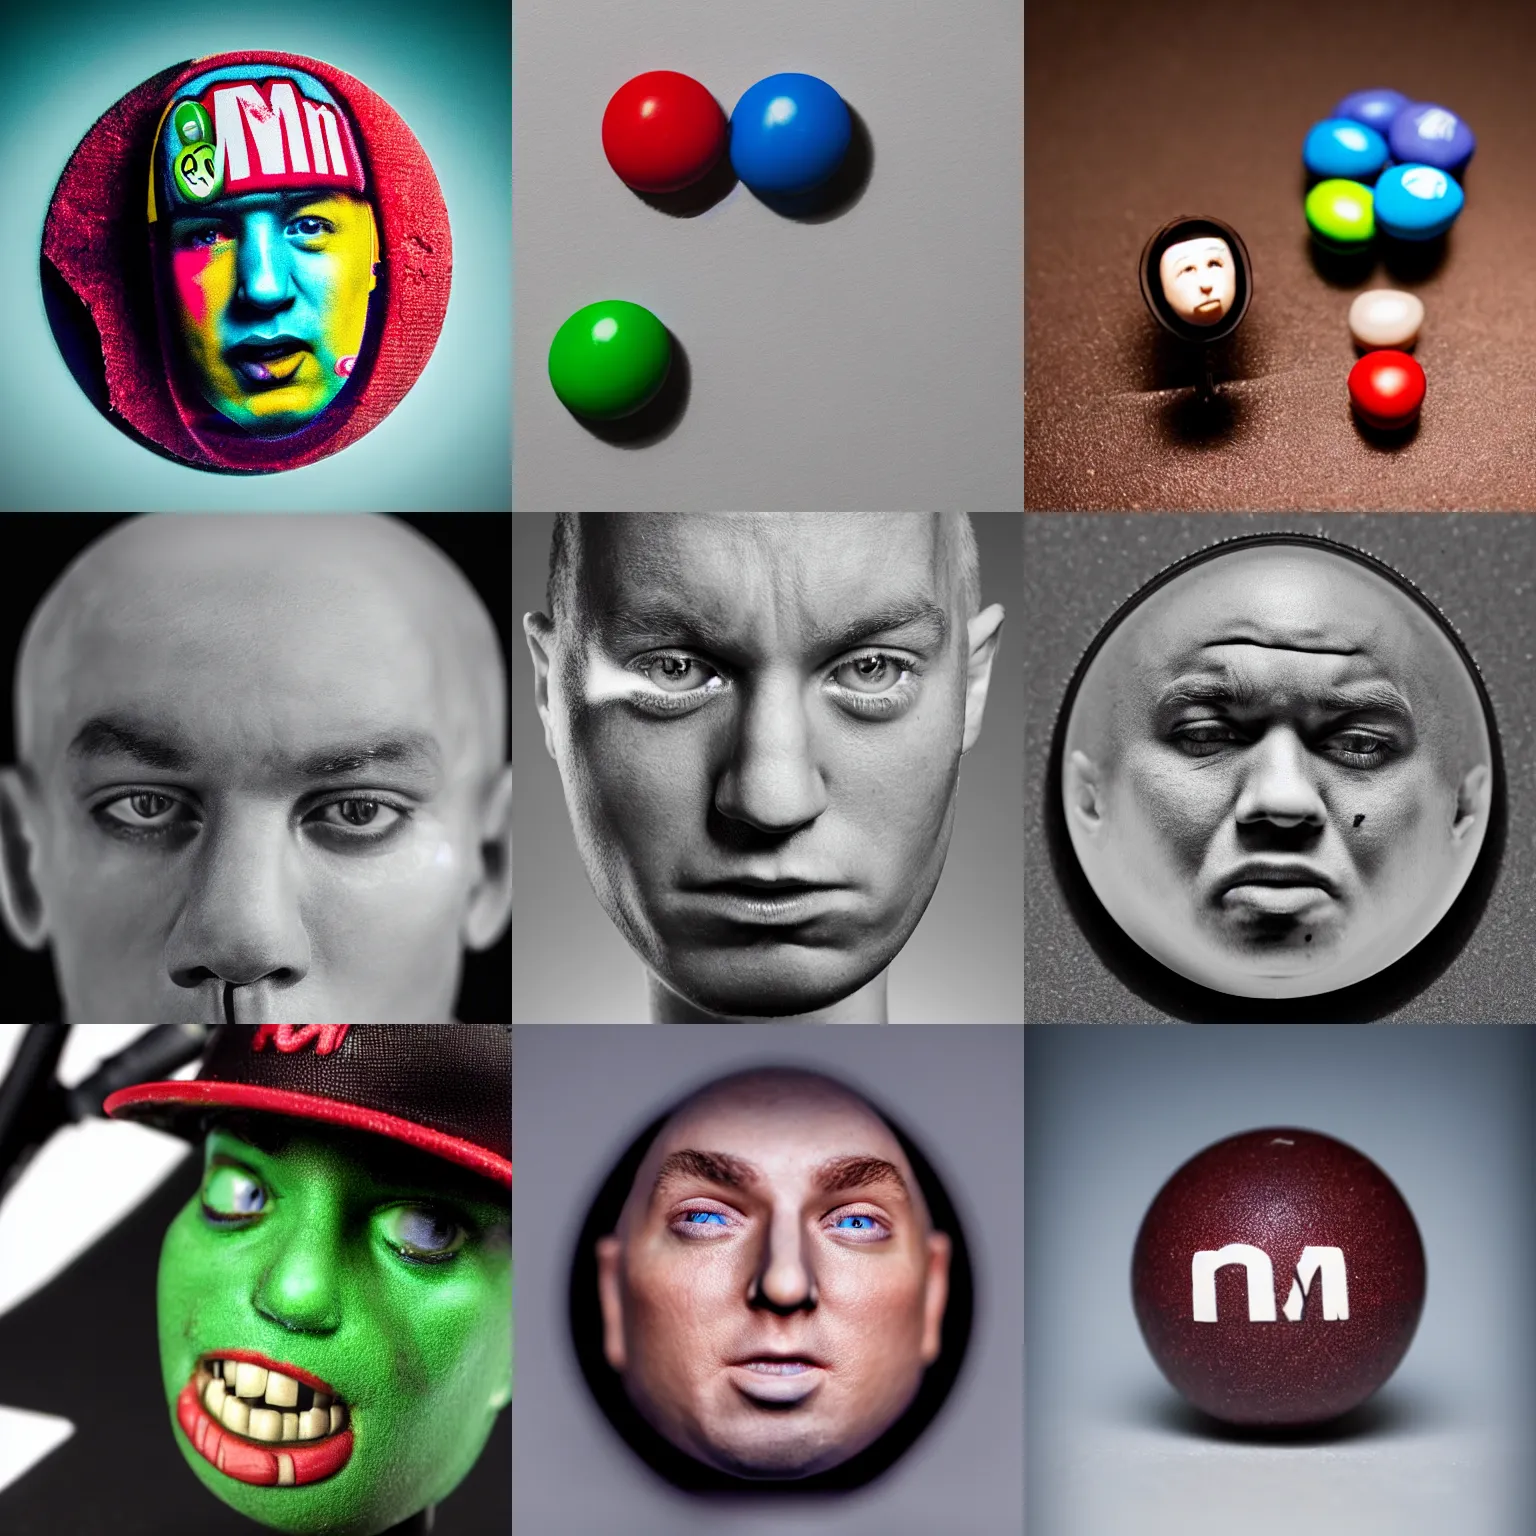 Prompt: an m & m with the face of rapper eminem, macro lens, studio lighting